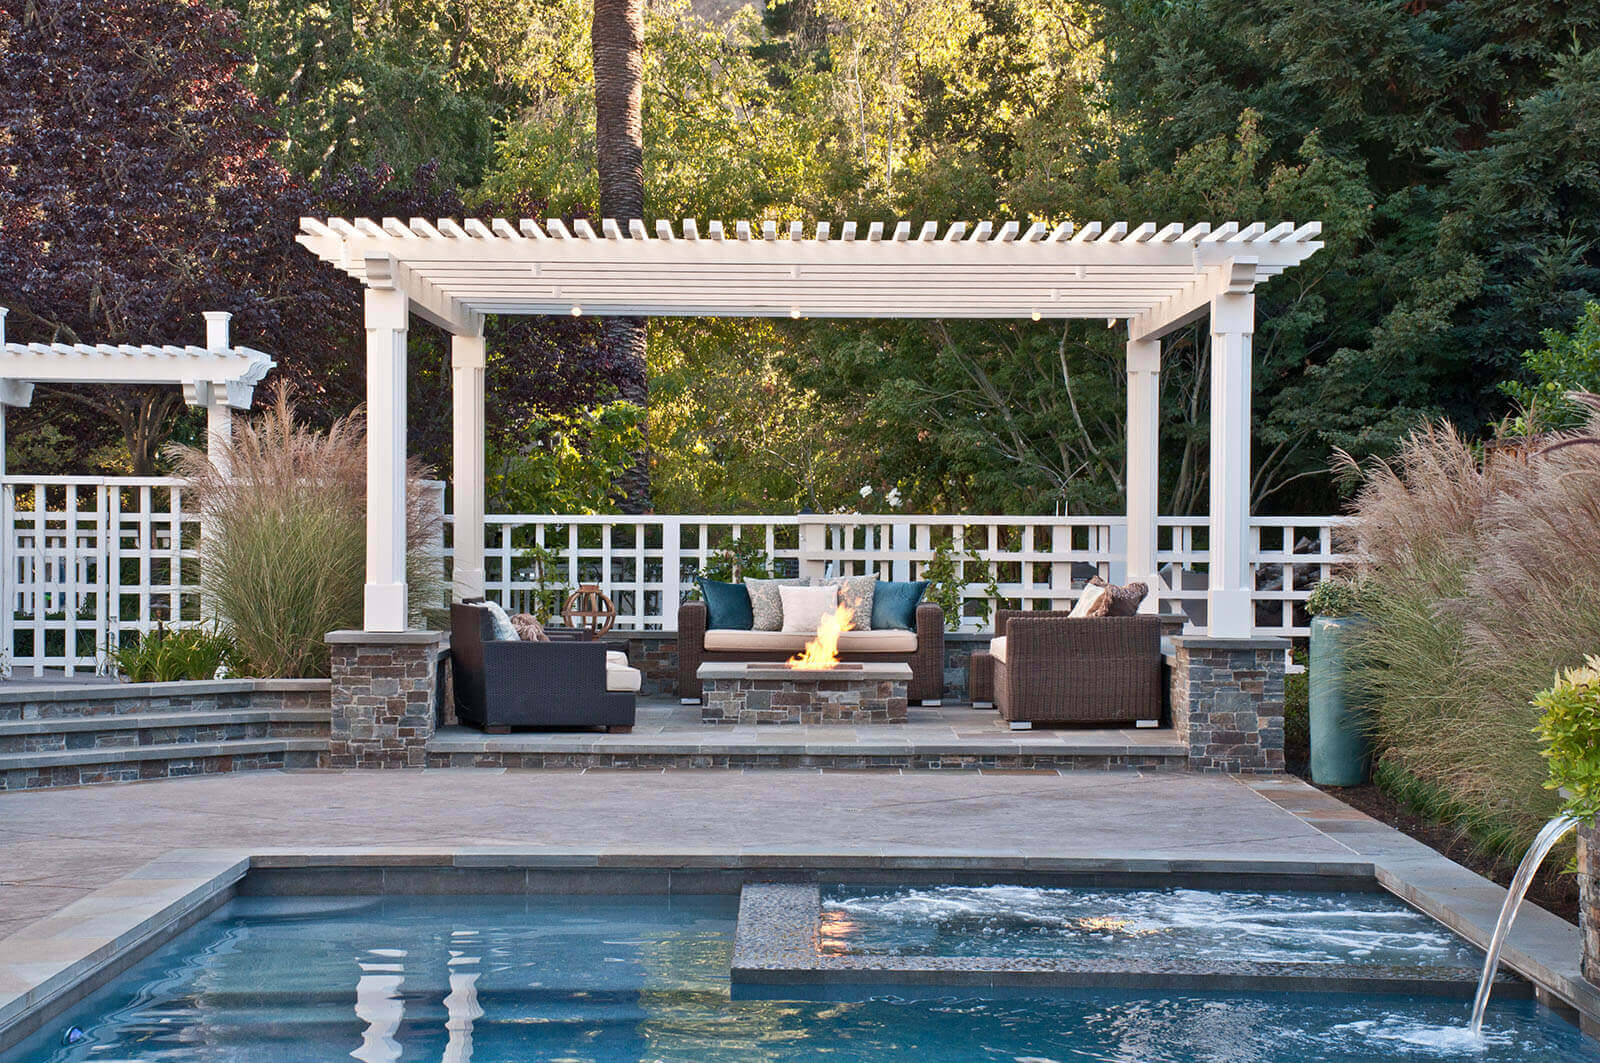 Poolside patio with rectangular gas fire pit and lounge area under a white pergola